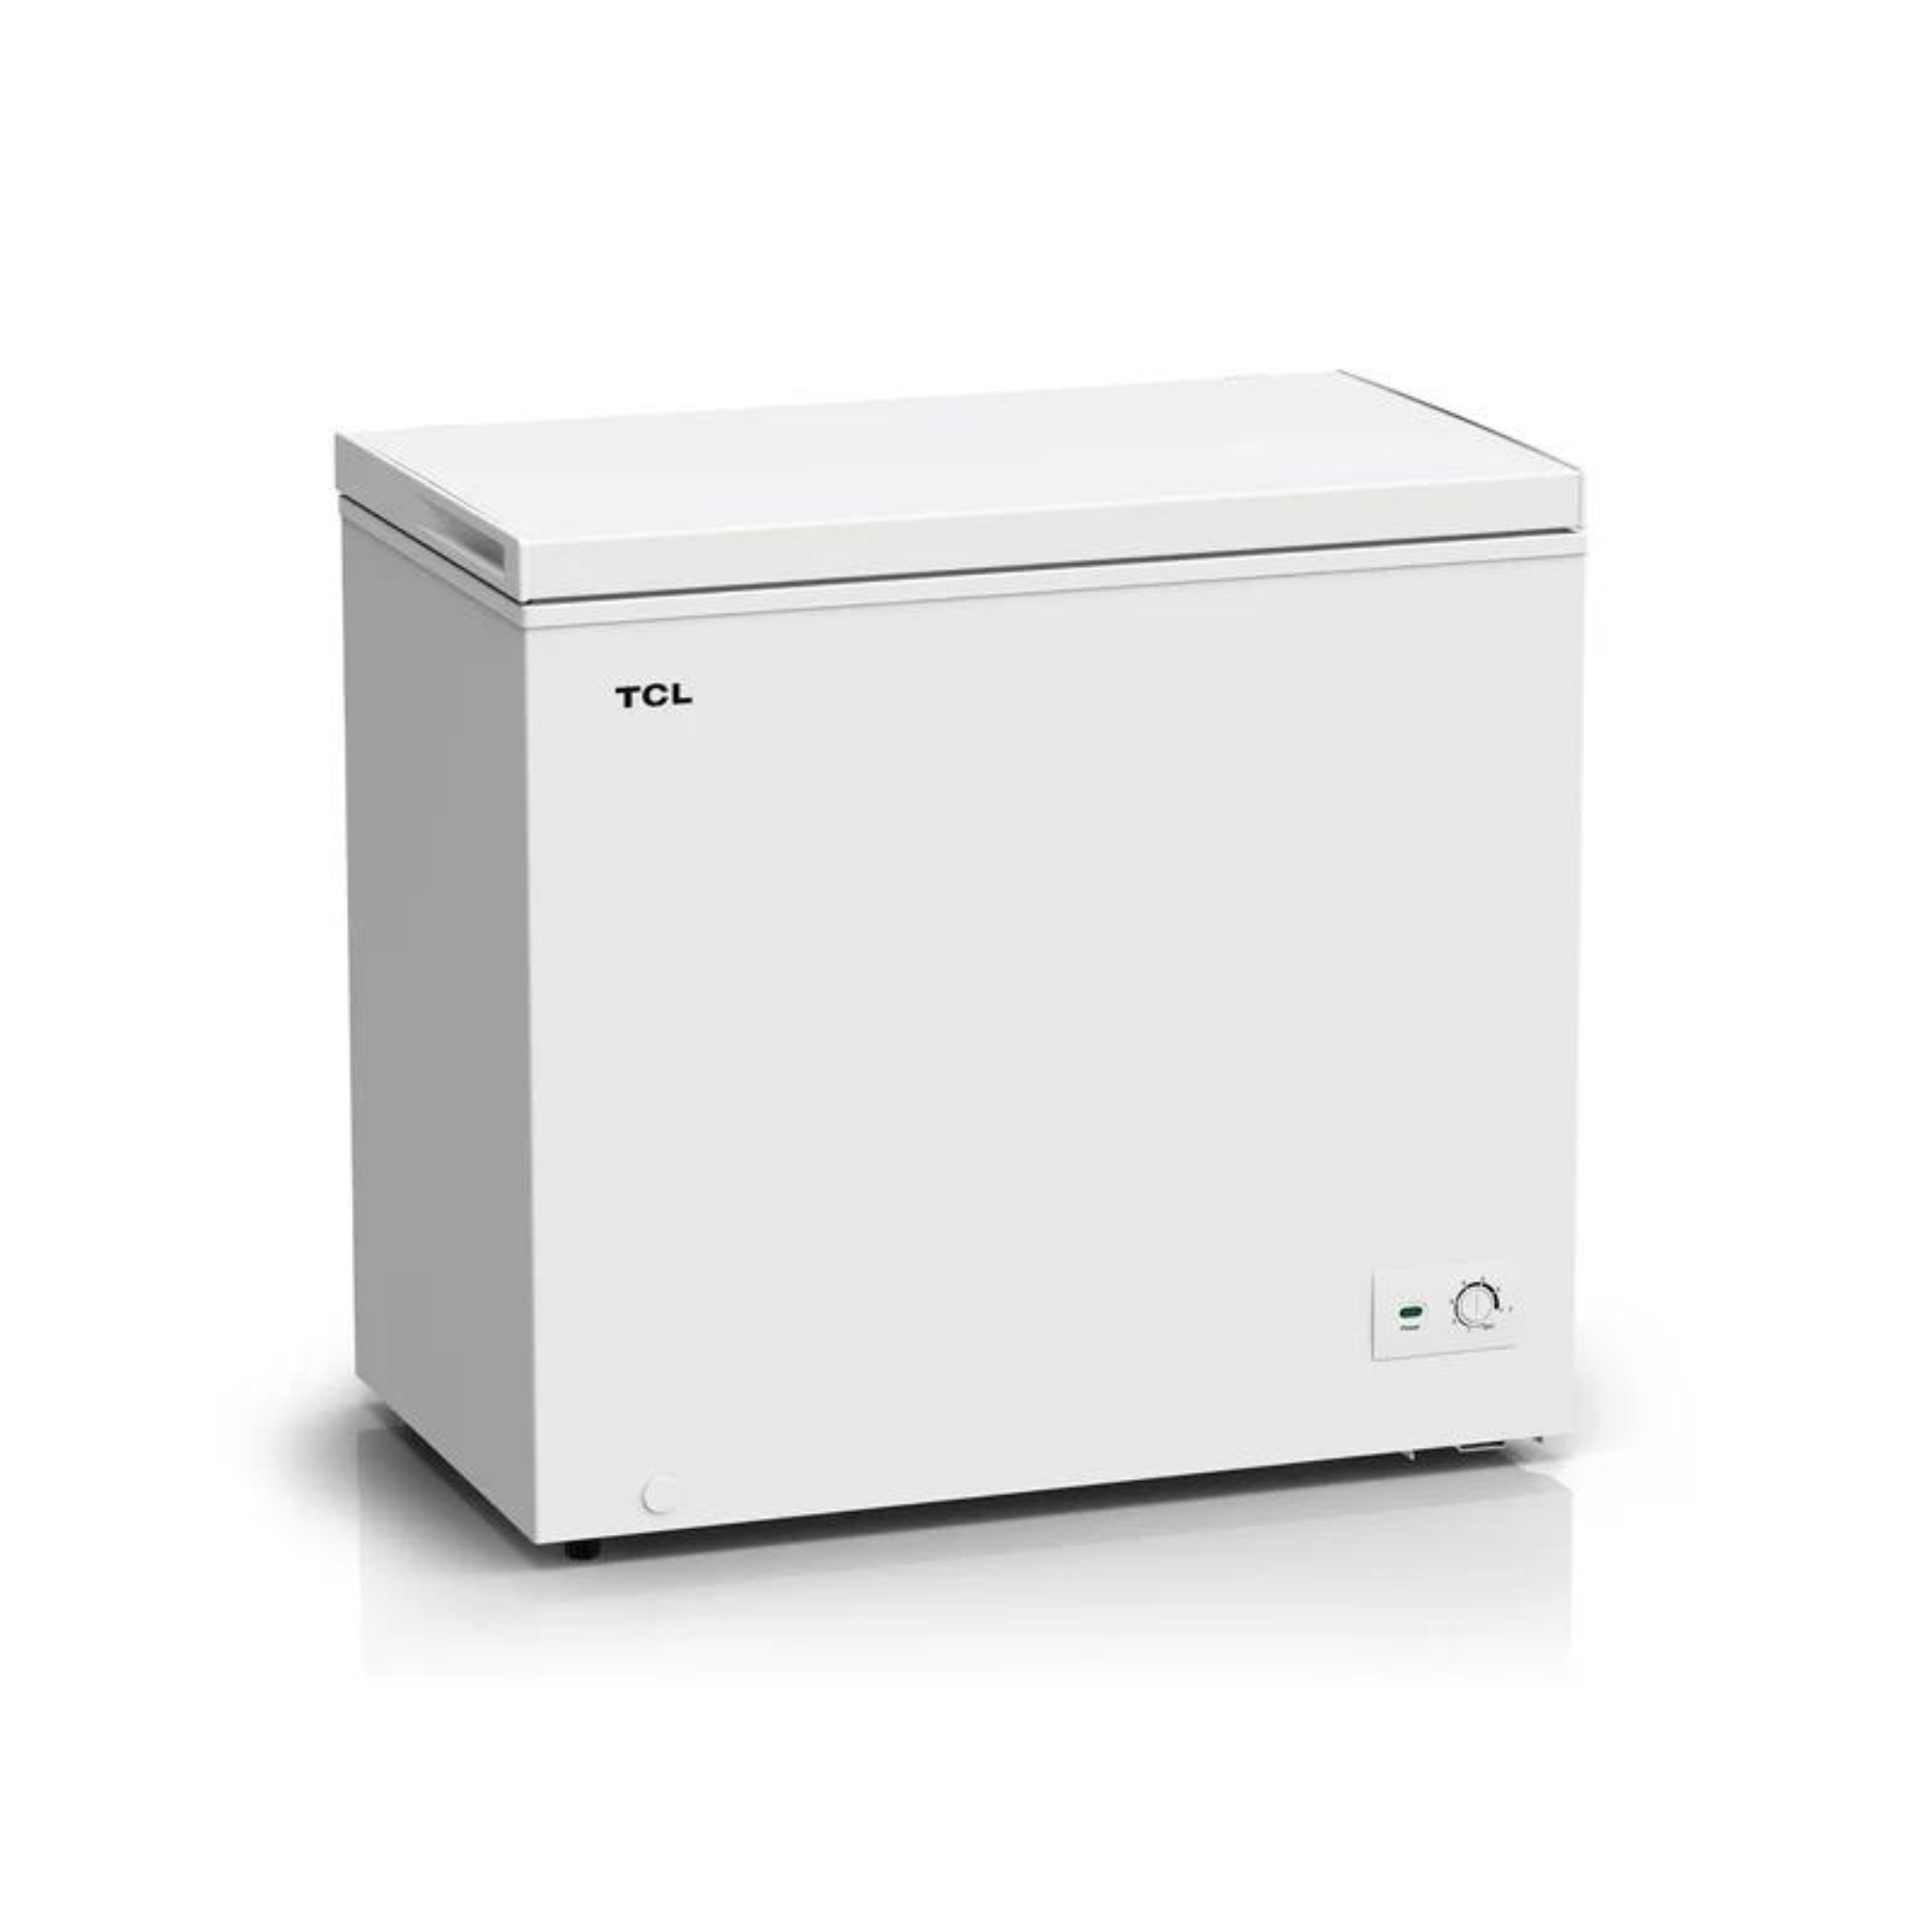 TCL 7.0 Cu. Ft. Chest Freezer (White)